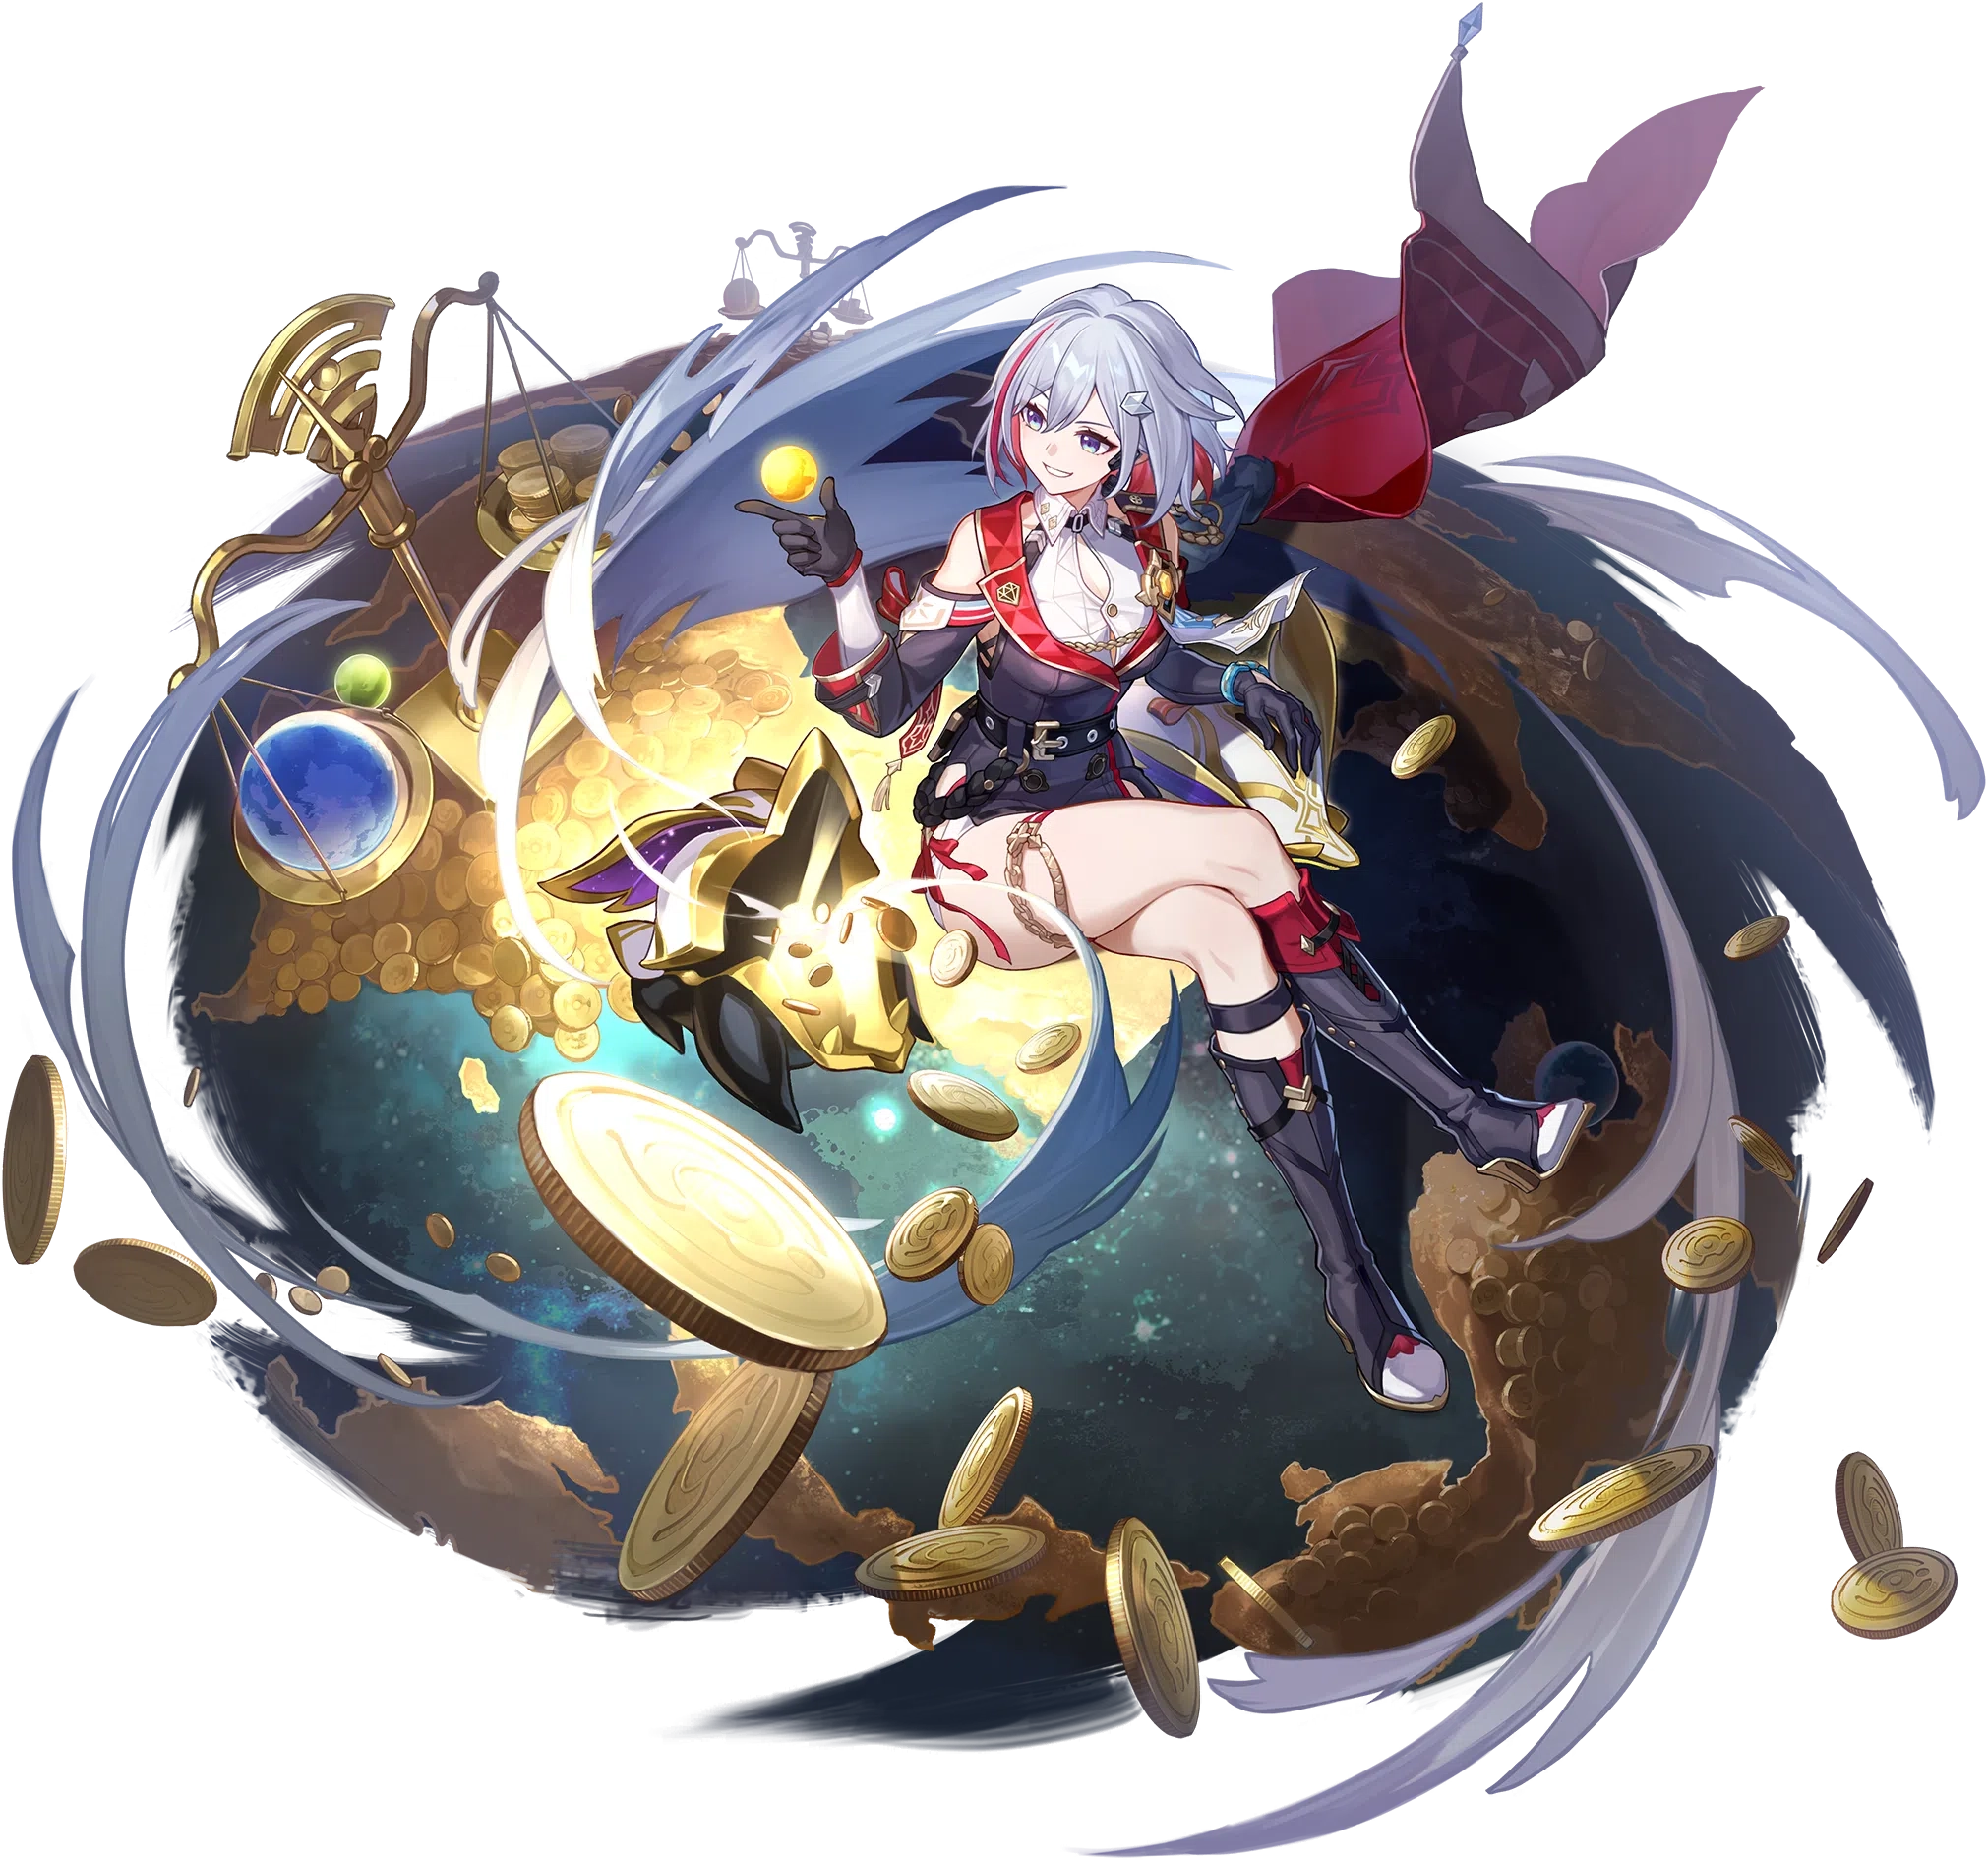 Titania has been leaked to be in Honkai Star Rail : r/FireEmblemHeroes